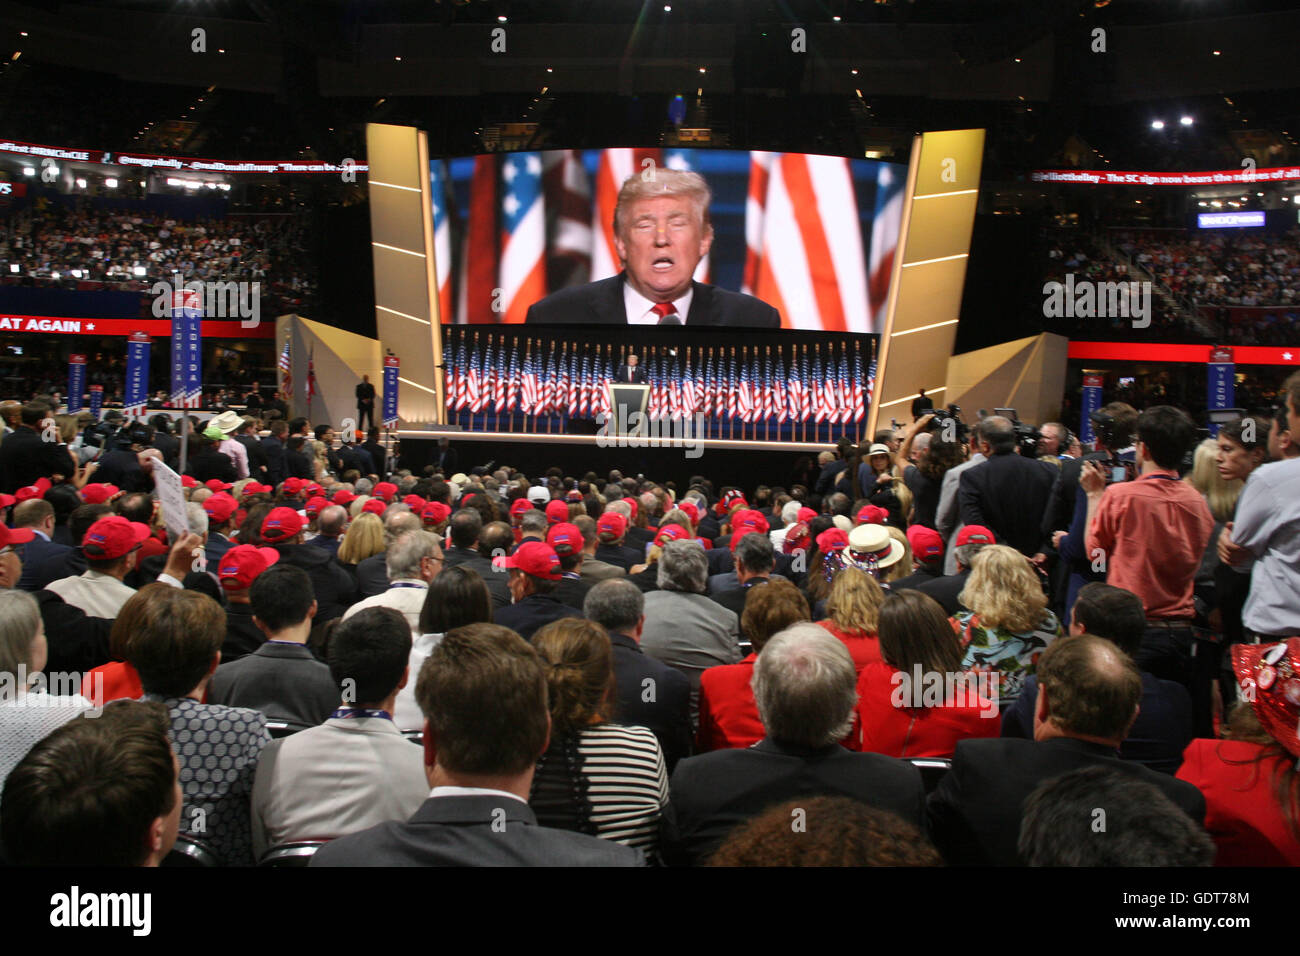 Cleveland, Ohio, USA. 21st July, 2016. Final Day of the Republican National Convention held at The Quicken Arena in Cleveland Ohio. Protests outside and Donald J. Trump Accepting the nomination inside the Arena. Credit:  Bruce Cotler/Globe Photos/ZUMA Wire/Alamy Live News Stock Photo